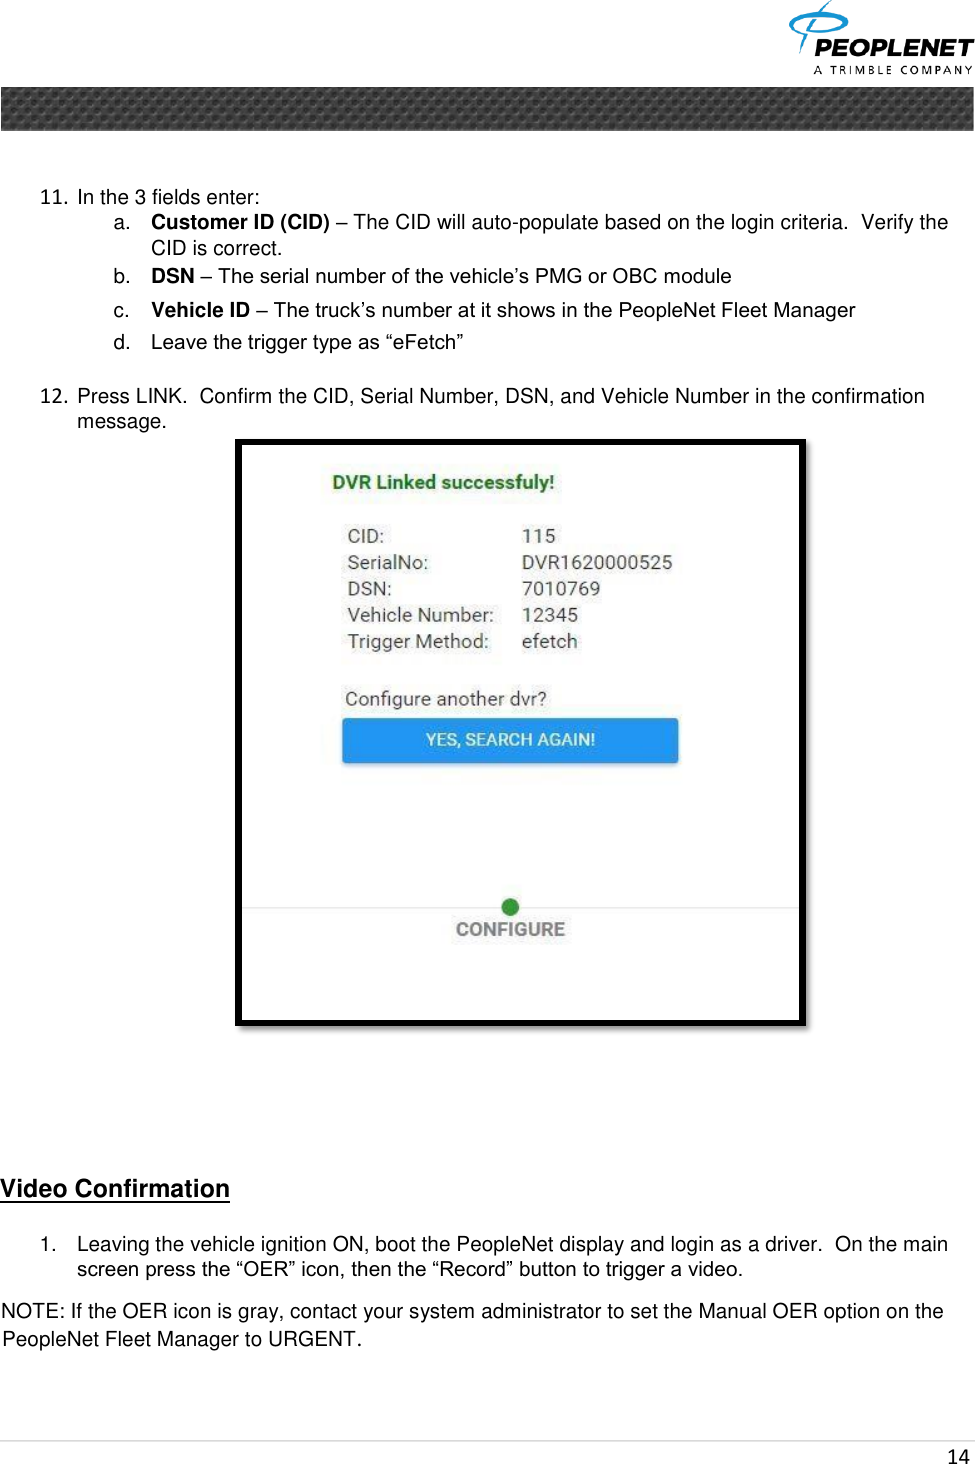  14        11. In the 3 fields enter:  a. Customer ID (CID) – The CID will auto-populate based on the login criteria.  Verify the CID is correct. b. DSN – The serial number of the vehicle’s PMG or OBC module  c. Vehicle ID – The truck’s number at it shows in the PeopleNet Fleet Manager d. Leave the trigger type as “eFetch”    12. Press LINK.  Confirm the CID, Serial Number, DSN, and Vehicle Number in the confirmation message.       Video Confirmation    1.  Leaving the vehicle ignition ON, boot the PeopleNet display and login as a driver.  On the main screen press the “OER” icon, then the “Record” button to trigger a video. NOTE: If the OER icon is gray, contact your system administrator to set the Manual OER option on the PeopleNet Fleet Manager to URGENT.   